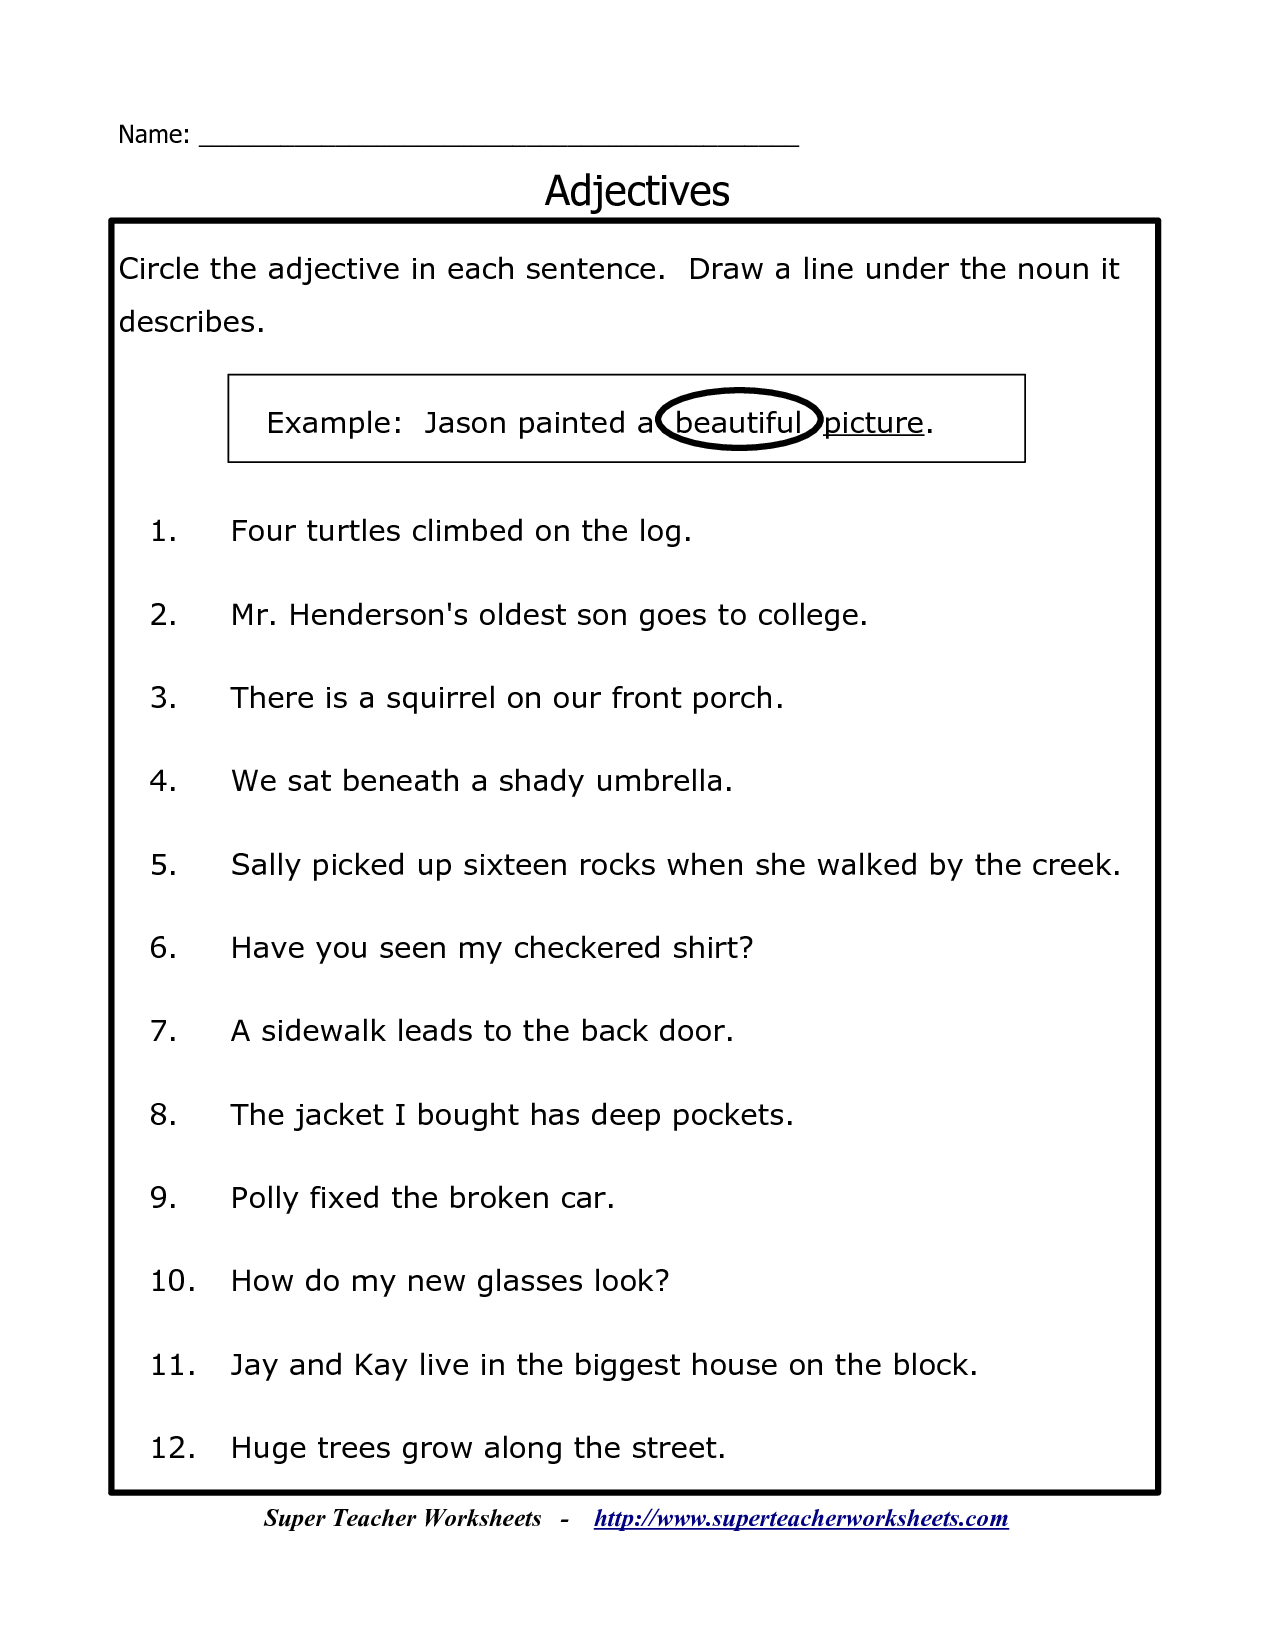 adverbs-adjectives-nouns-worksheets-for-grade-grammar-worksheets-the